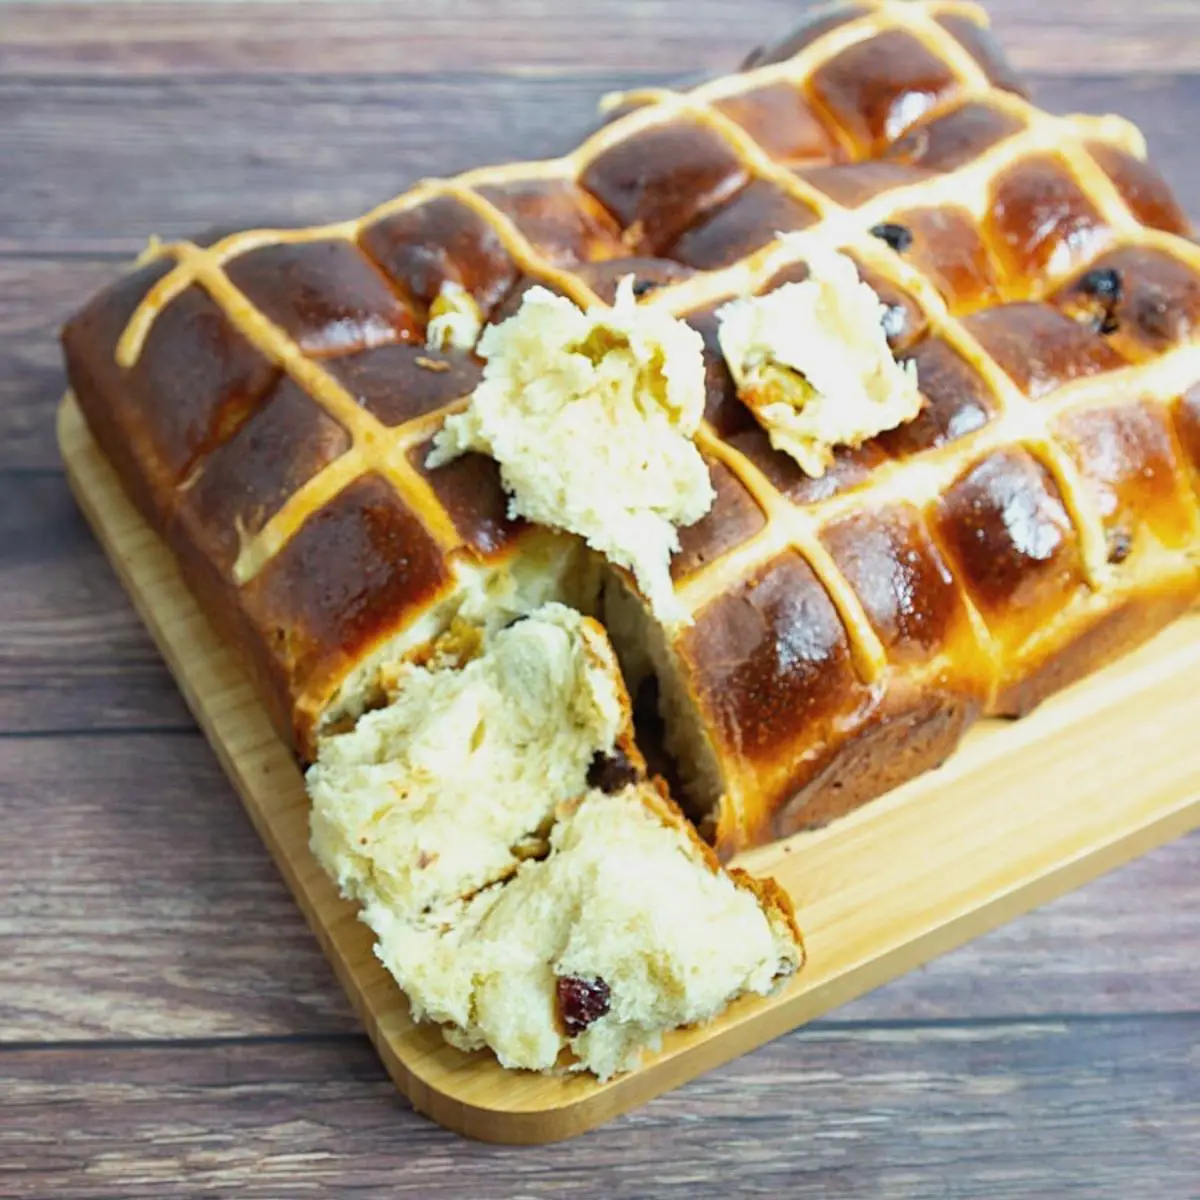 A tray with hot cross buns.